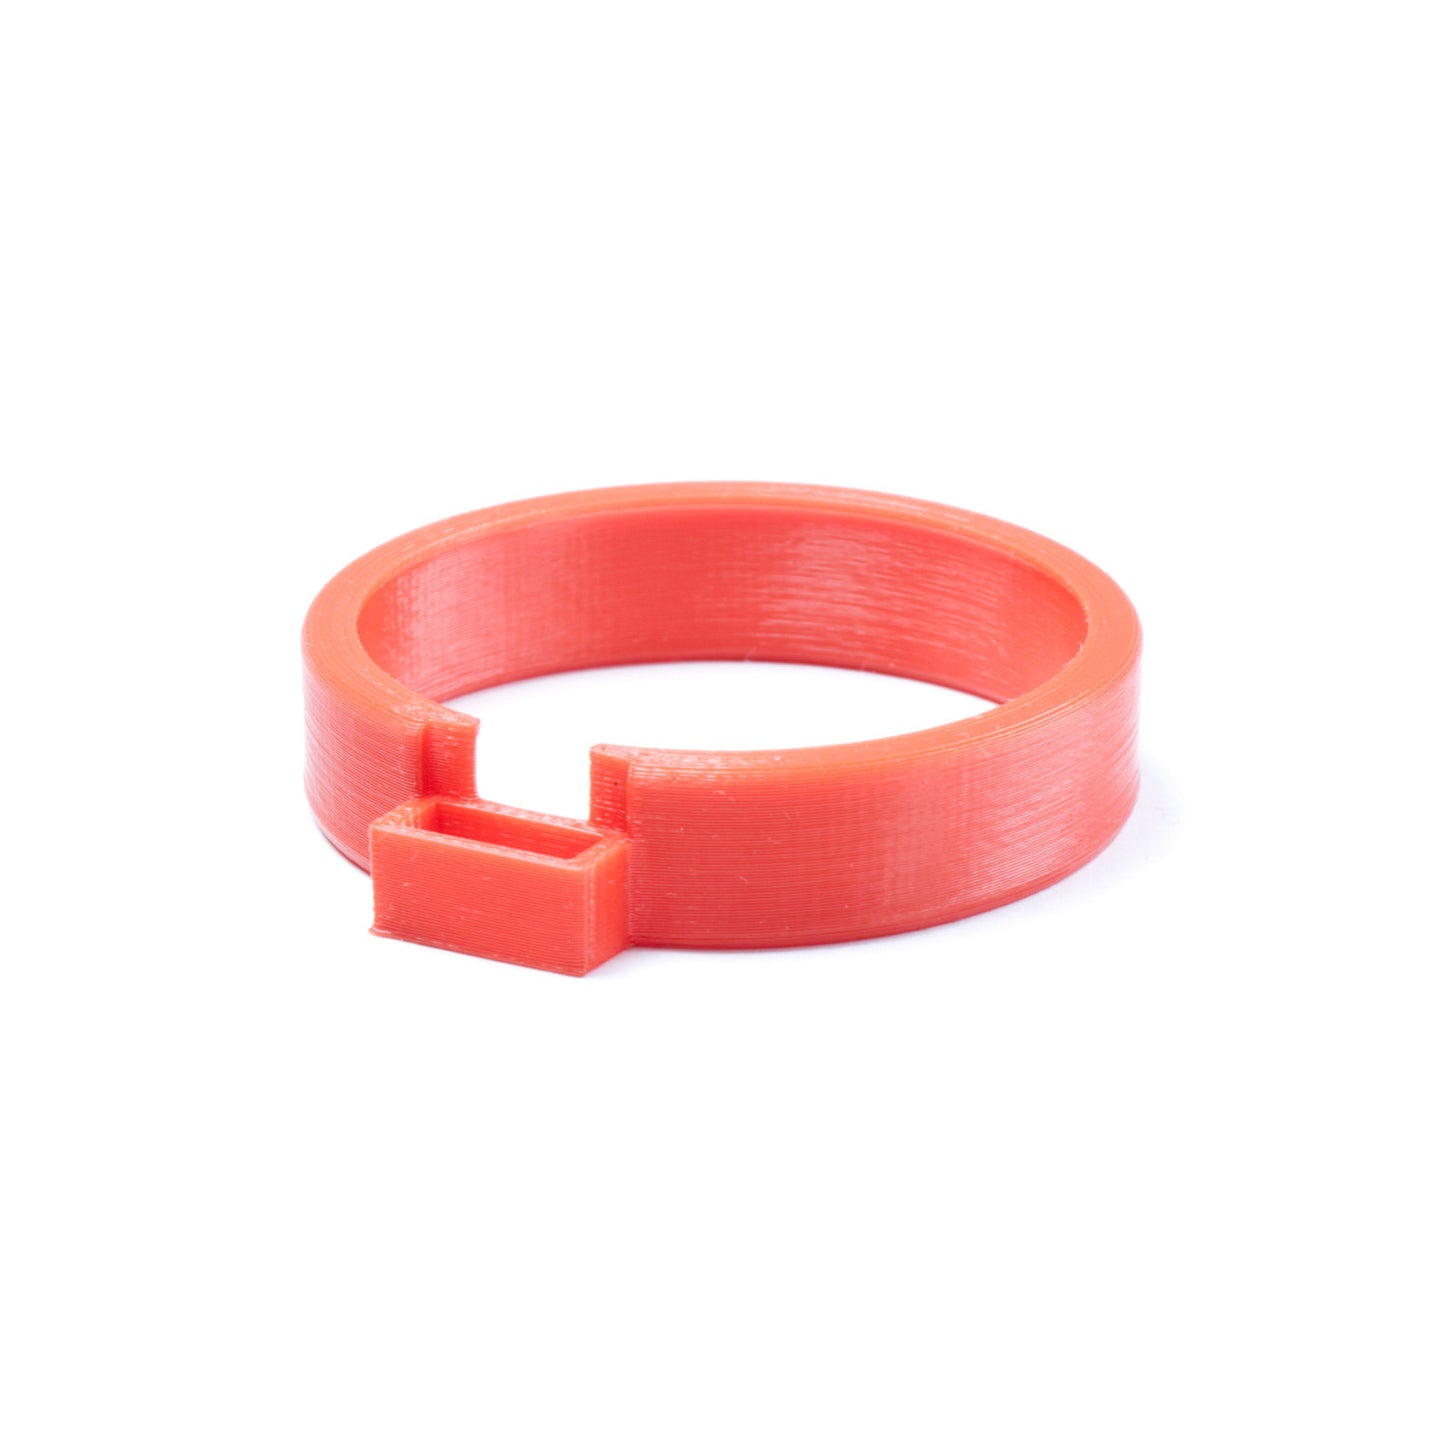 3Dconnexion SpaceMouse Wireless USB Adapter Holder / Protector Ring - 3D Shape Engineering